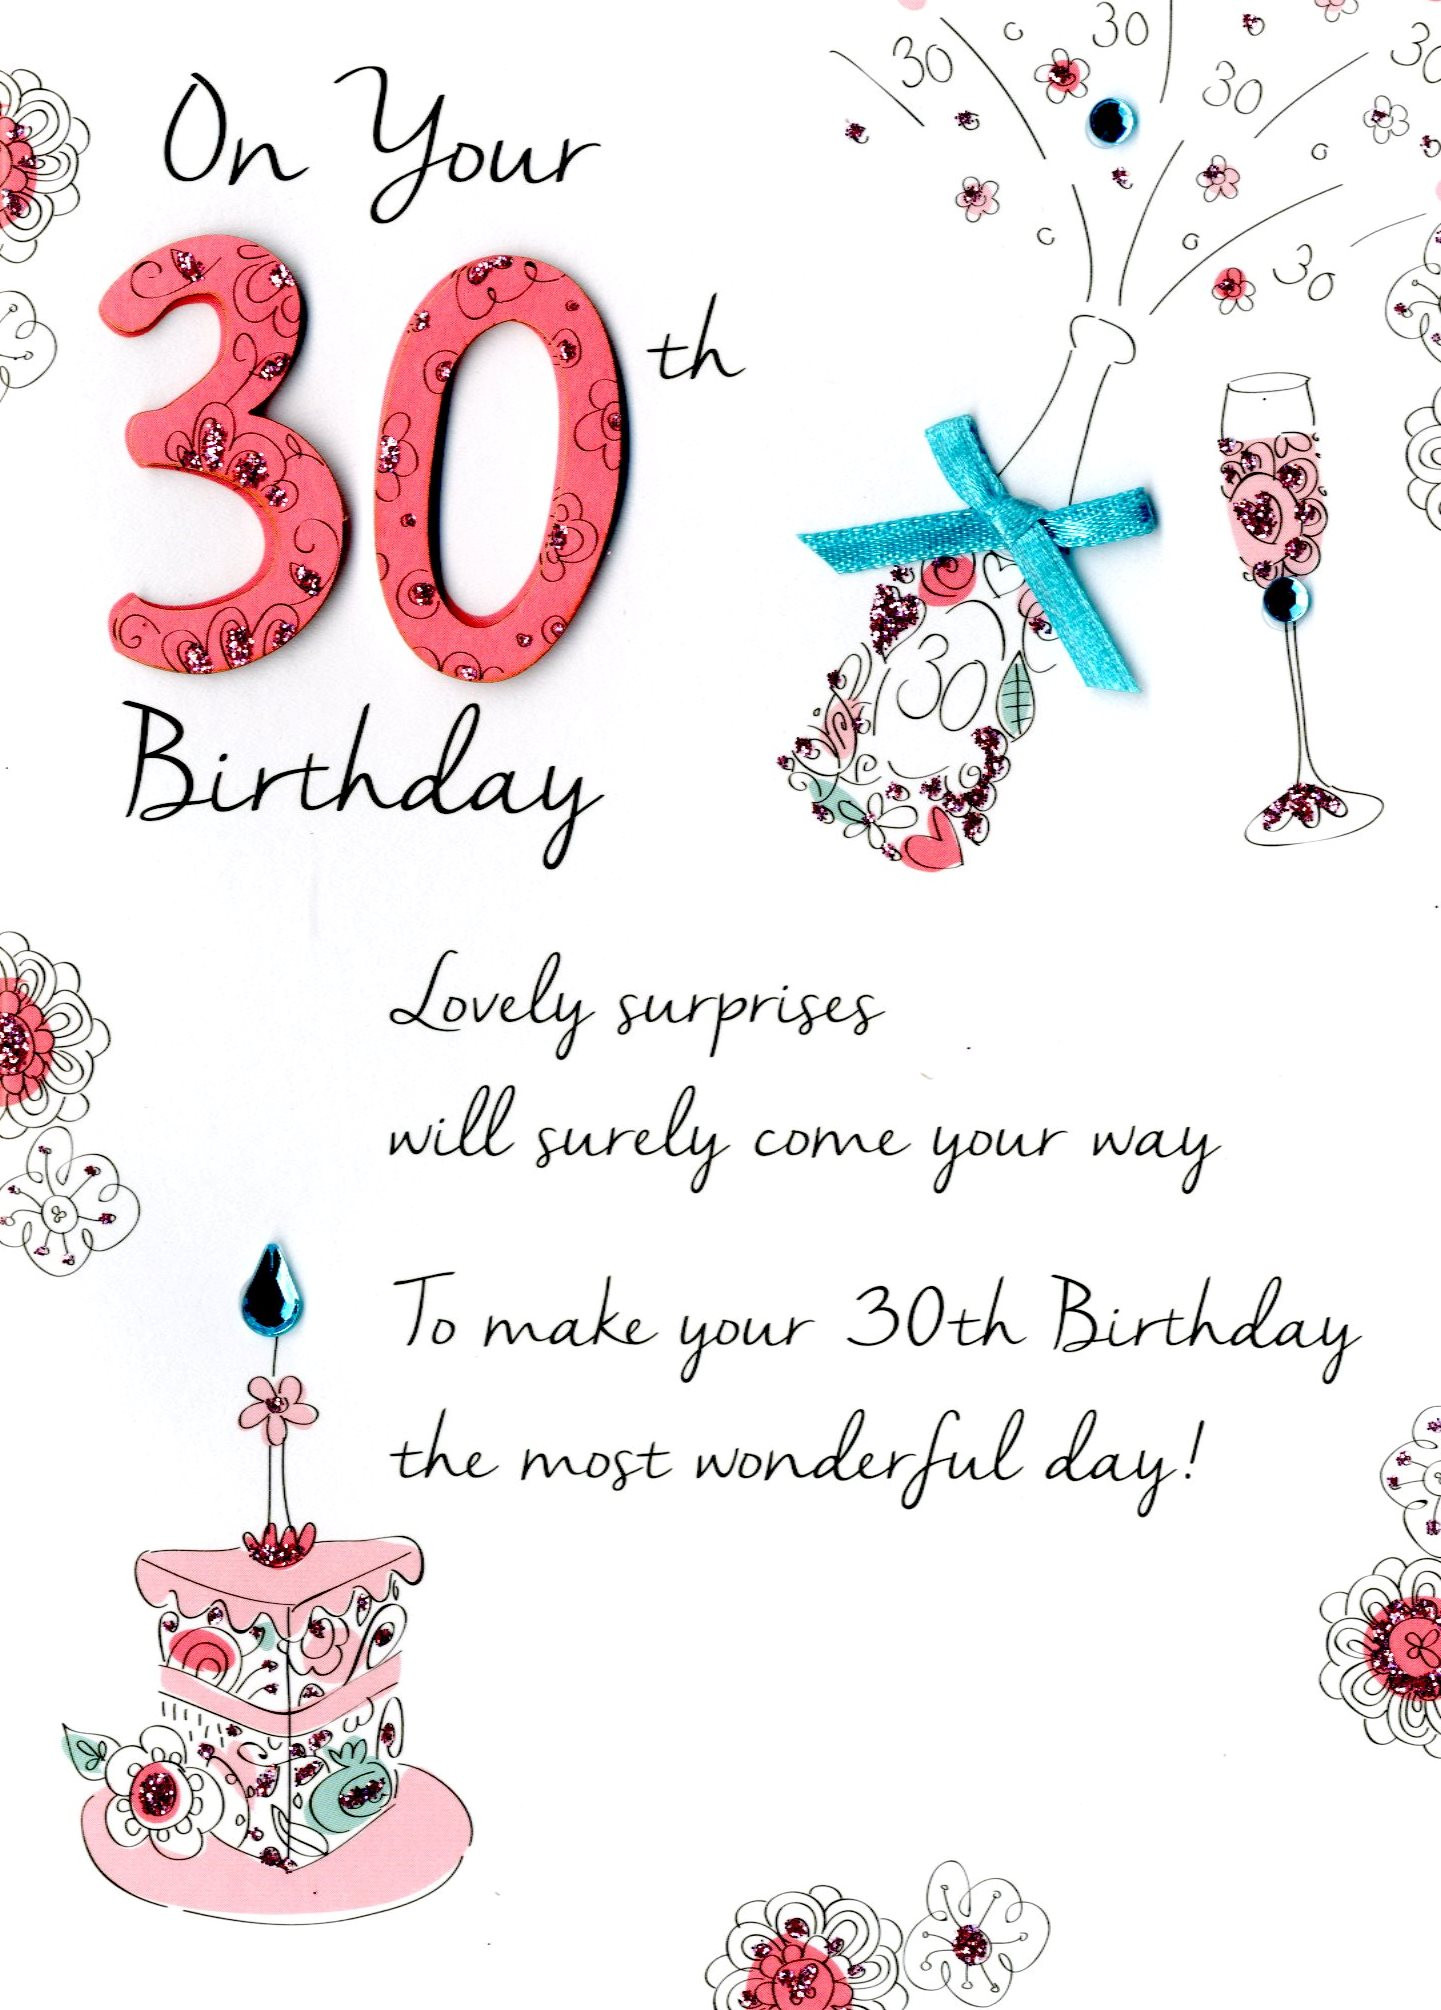 Best 30th Birthday Card Messages from Female 30th Birthday Greeting Card .....